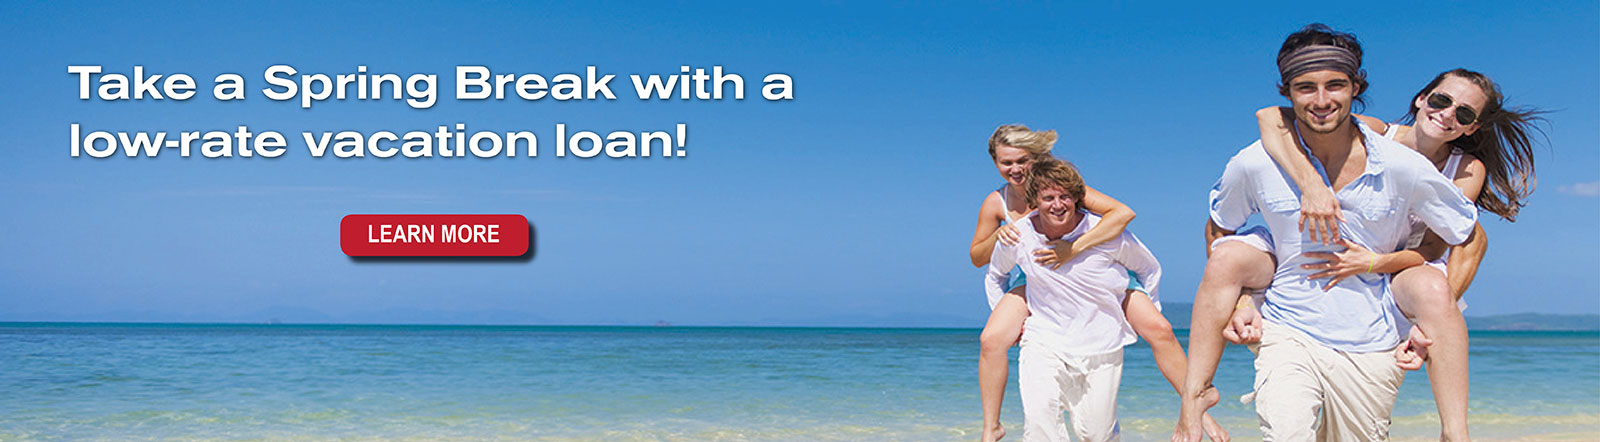 Take a Spring Break with a low-rate vacation loan!